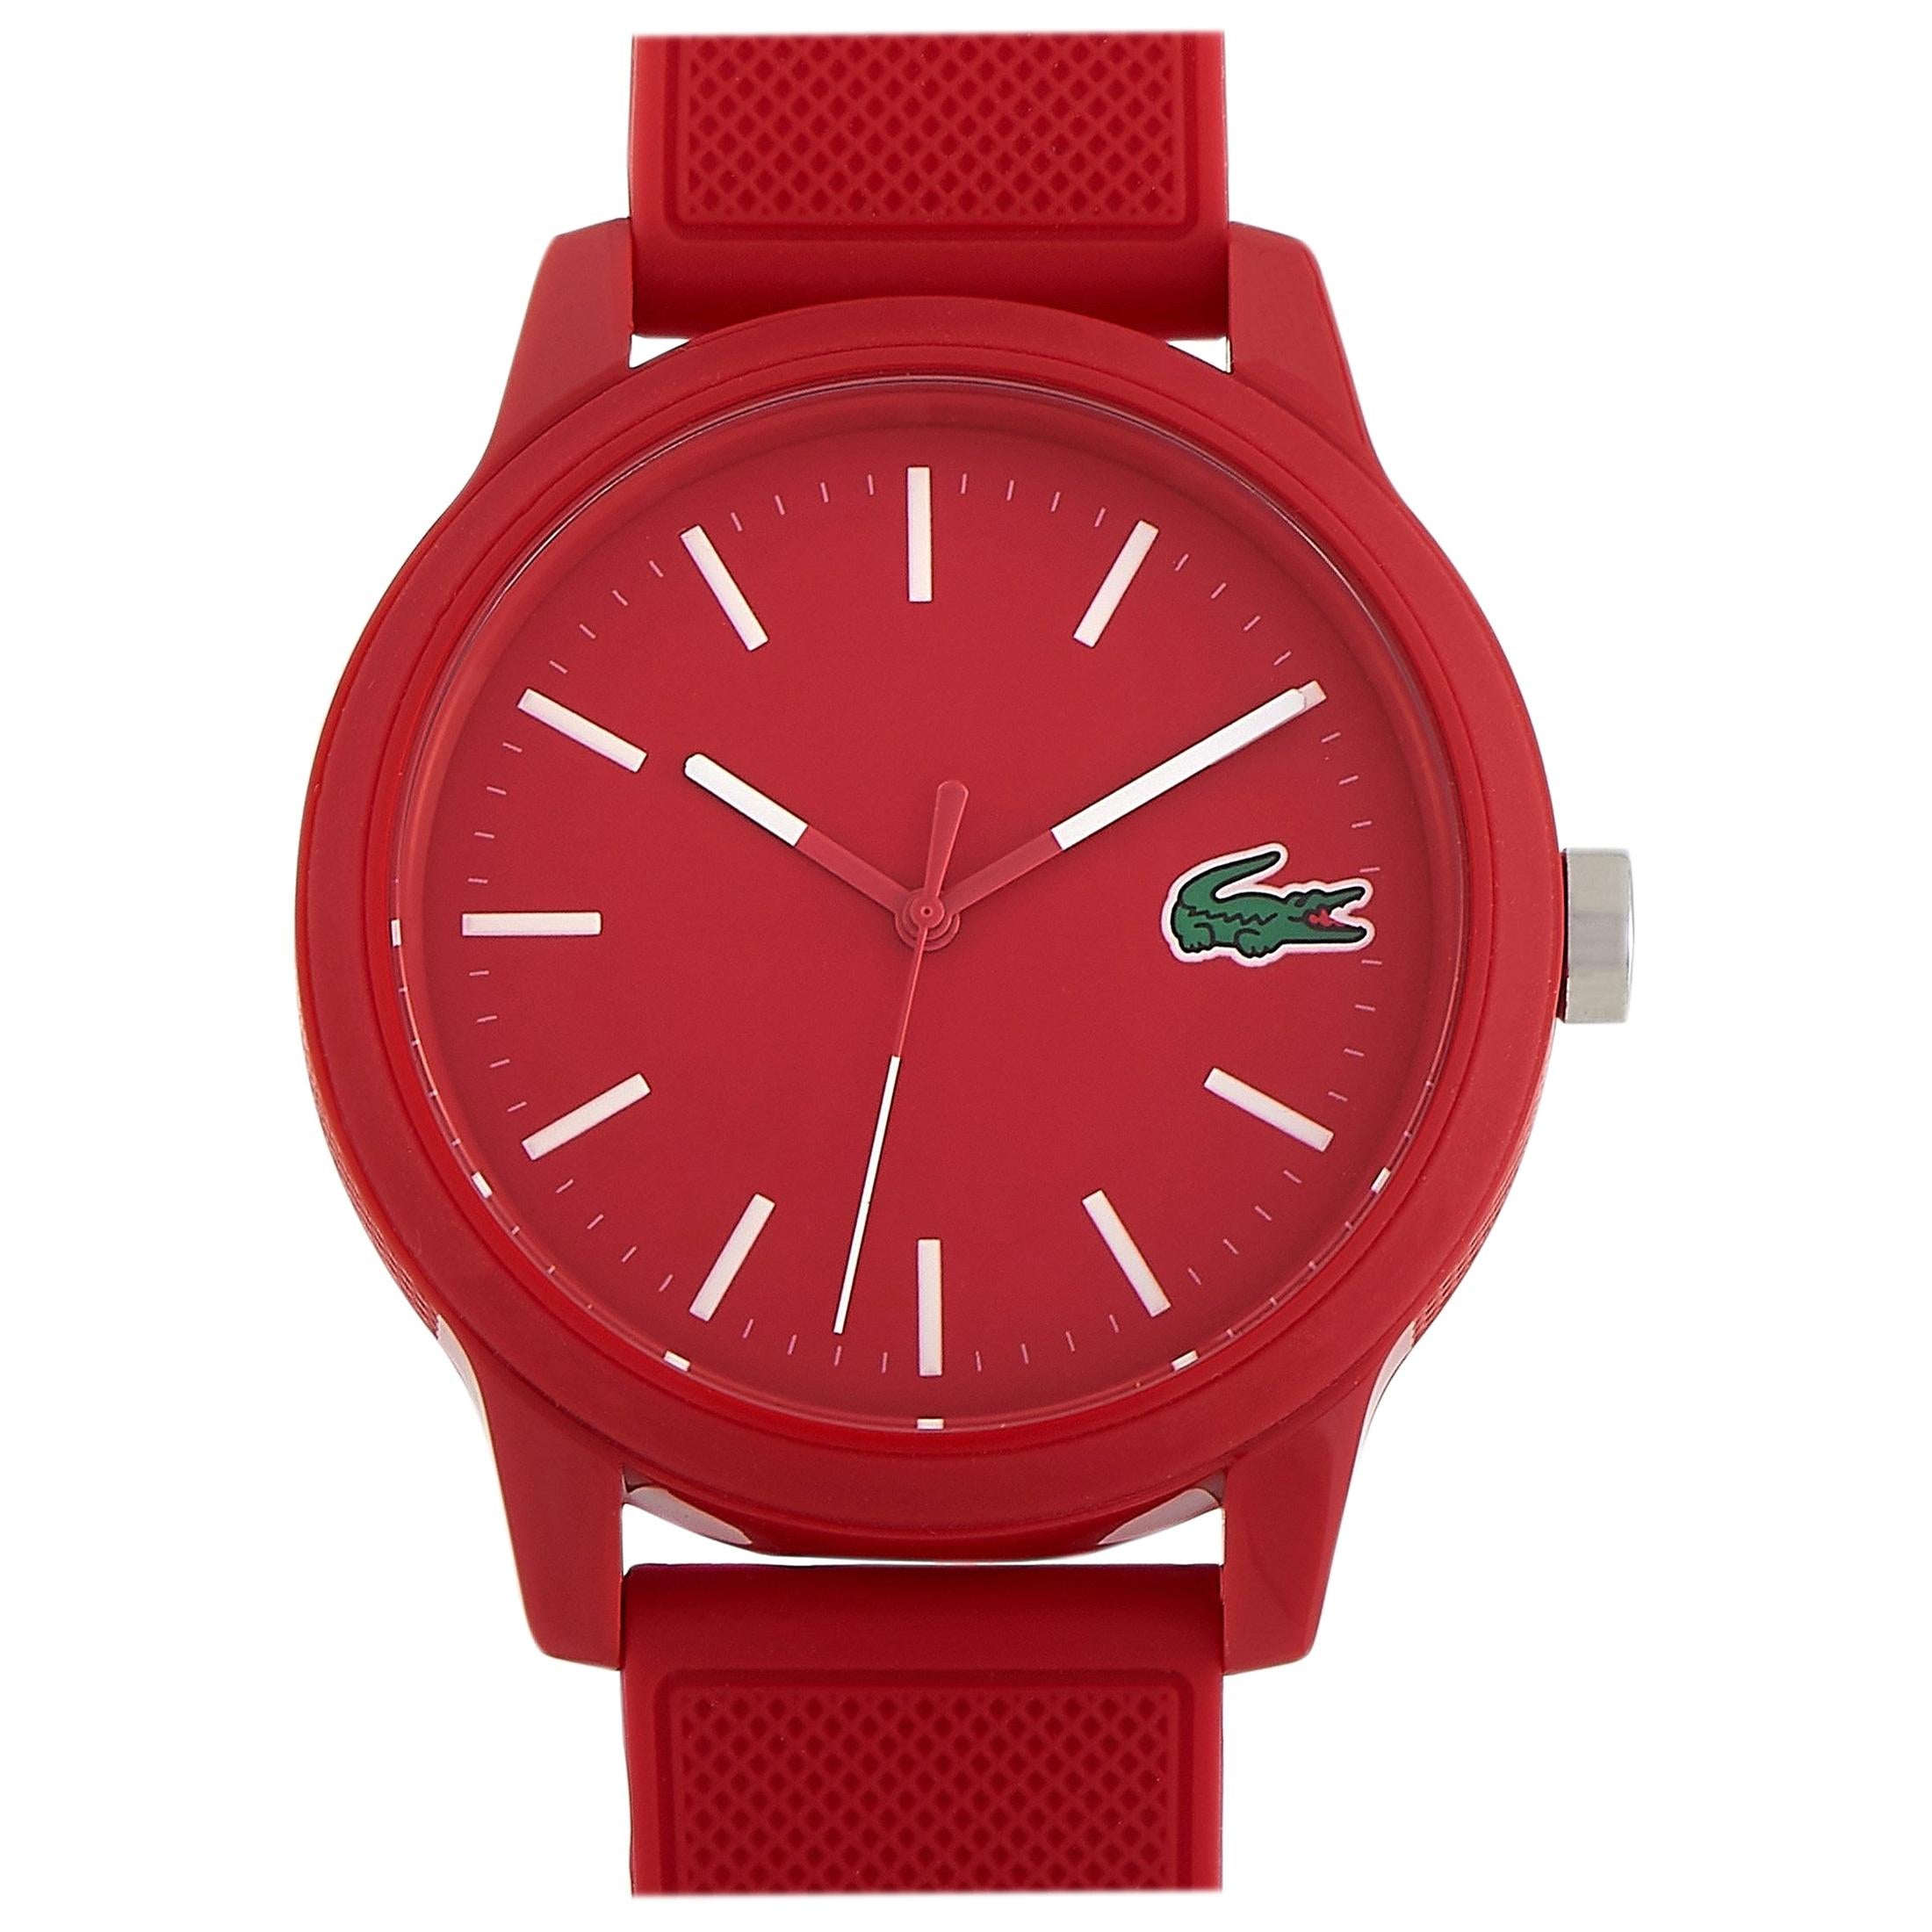 Lacoste Lacoste.12.12 TR90 Red Watch 2010988